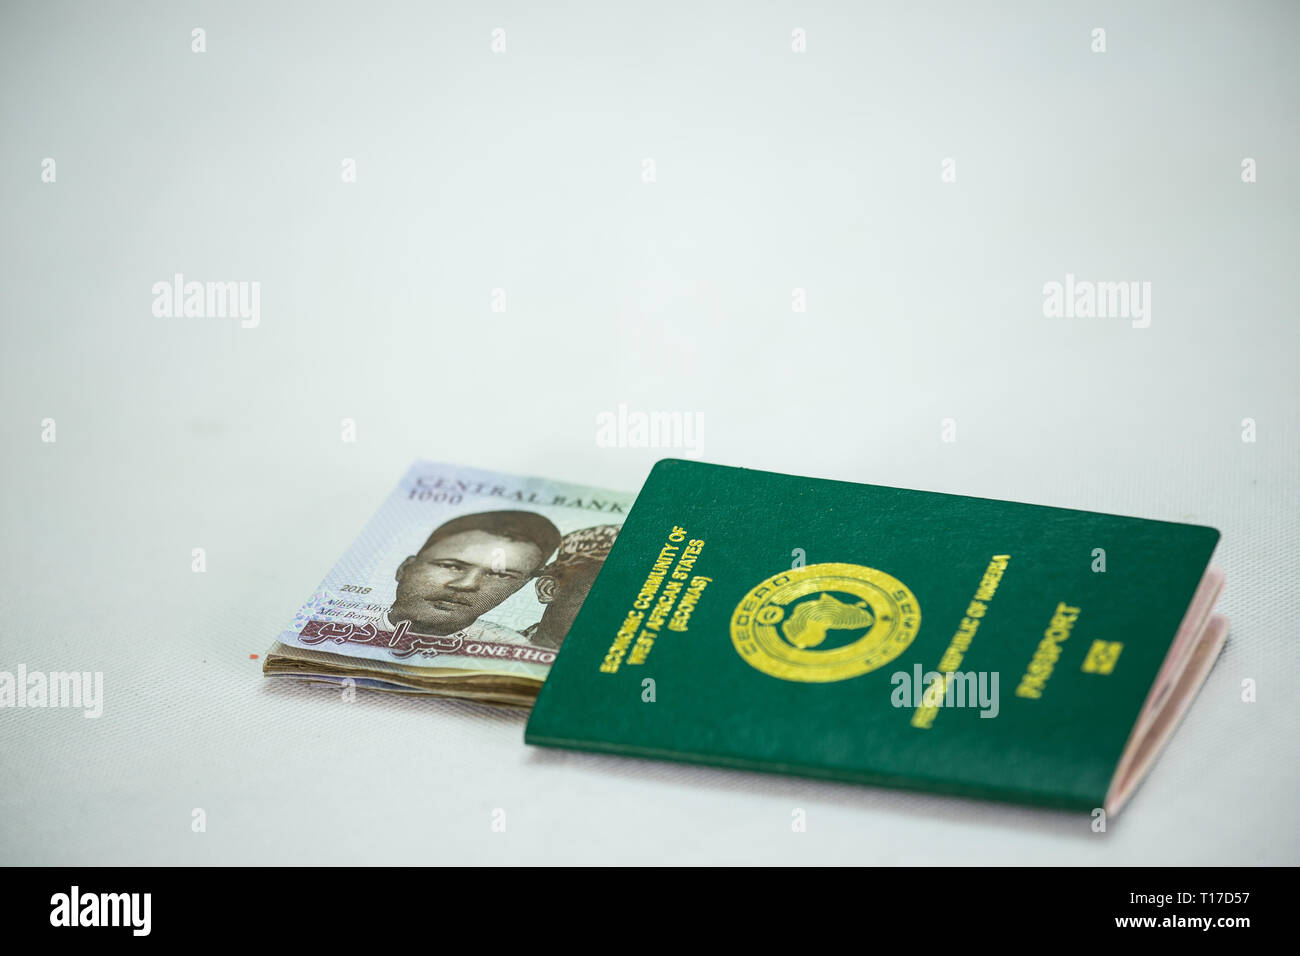 International Passport with local currency notes Stock Photo